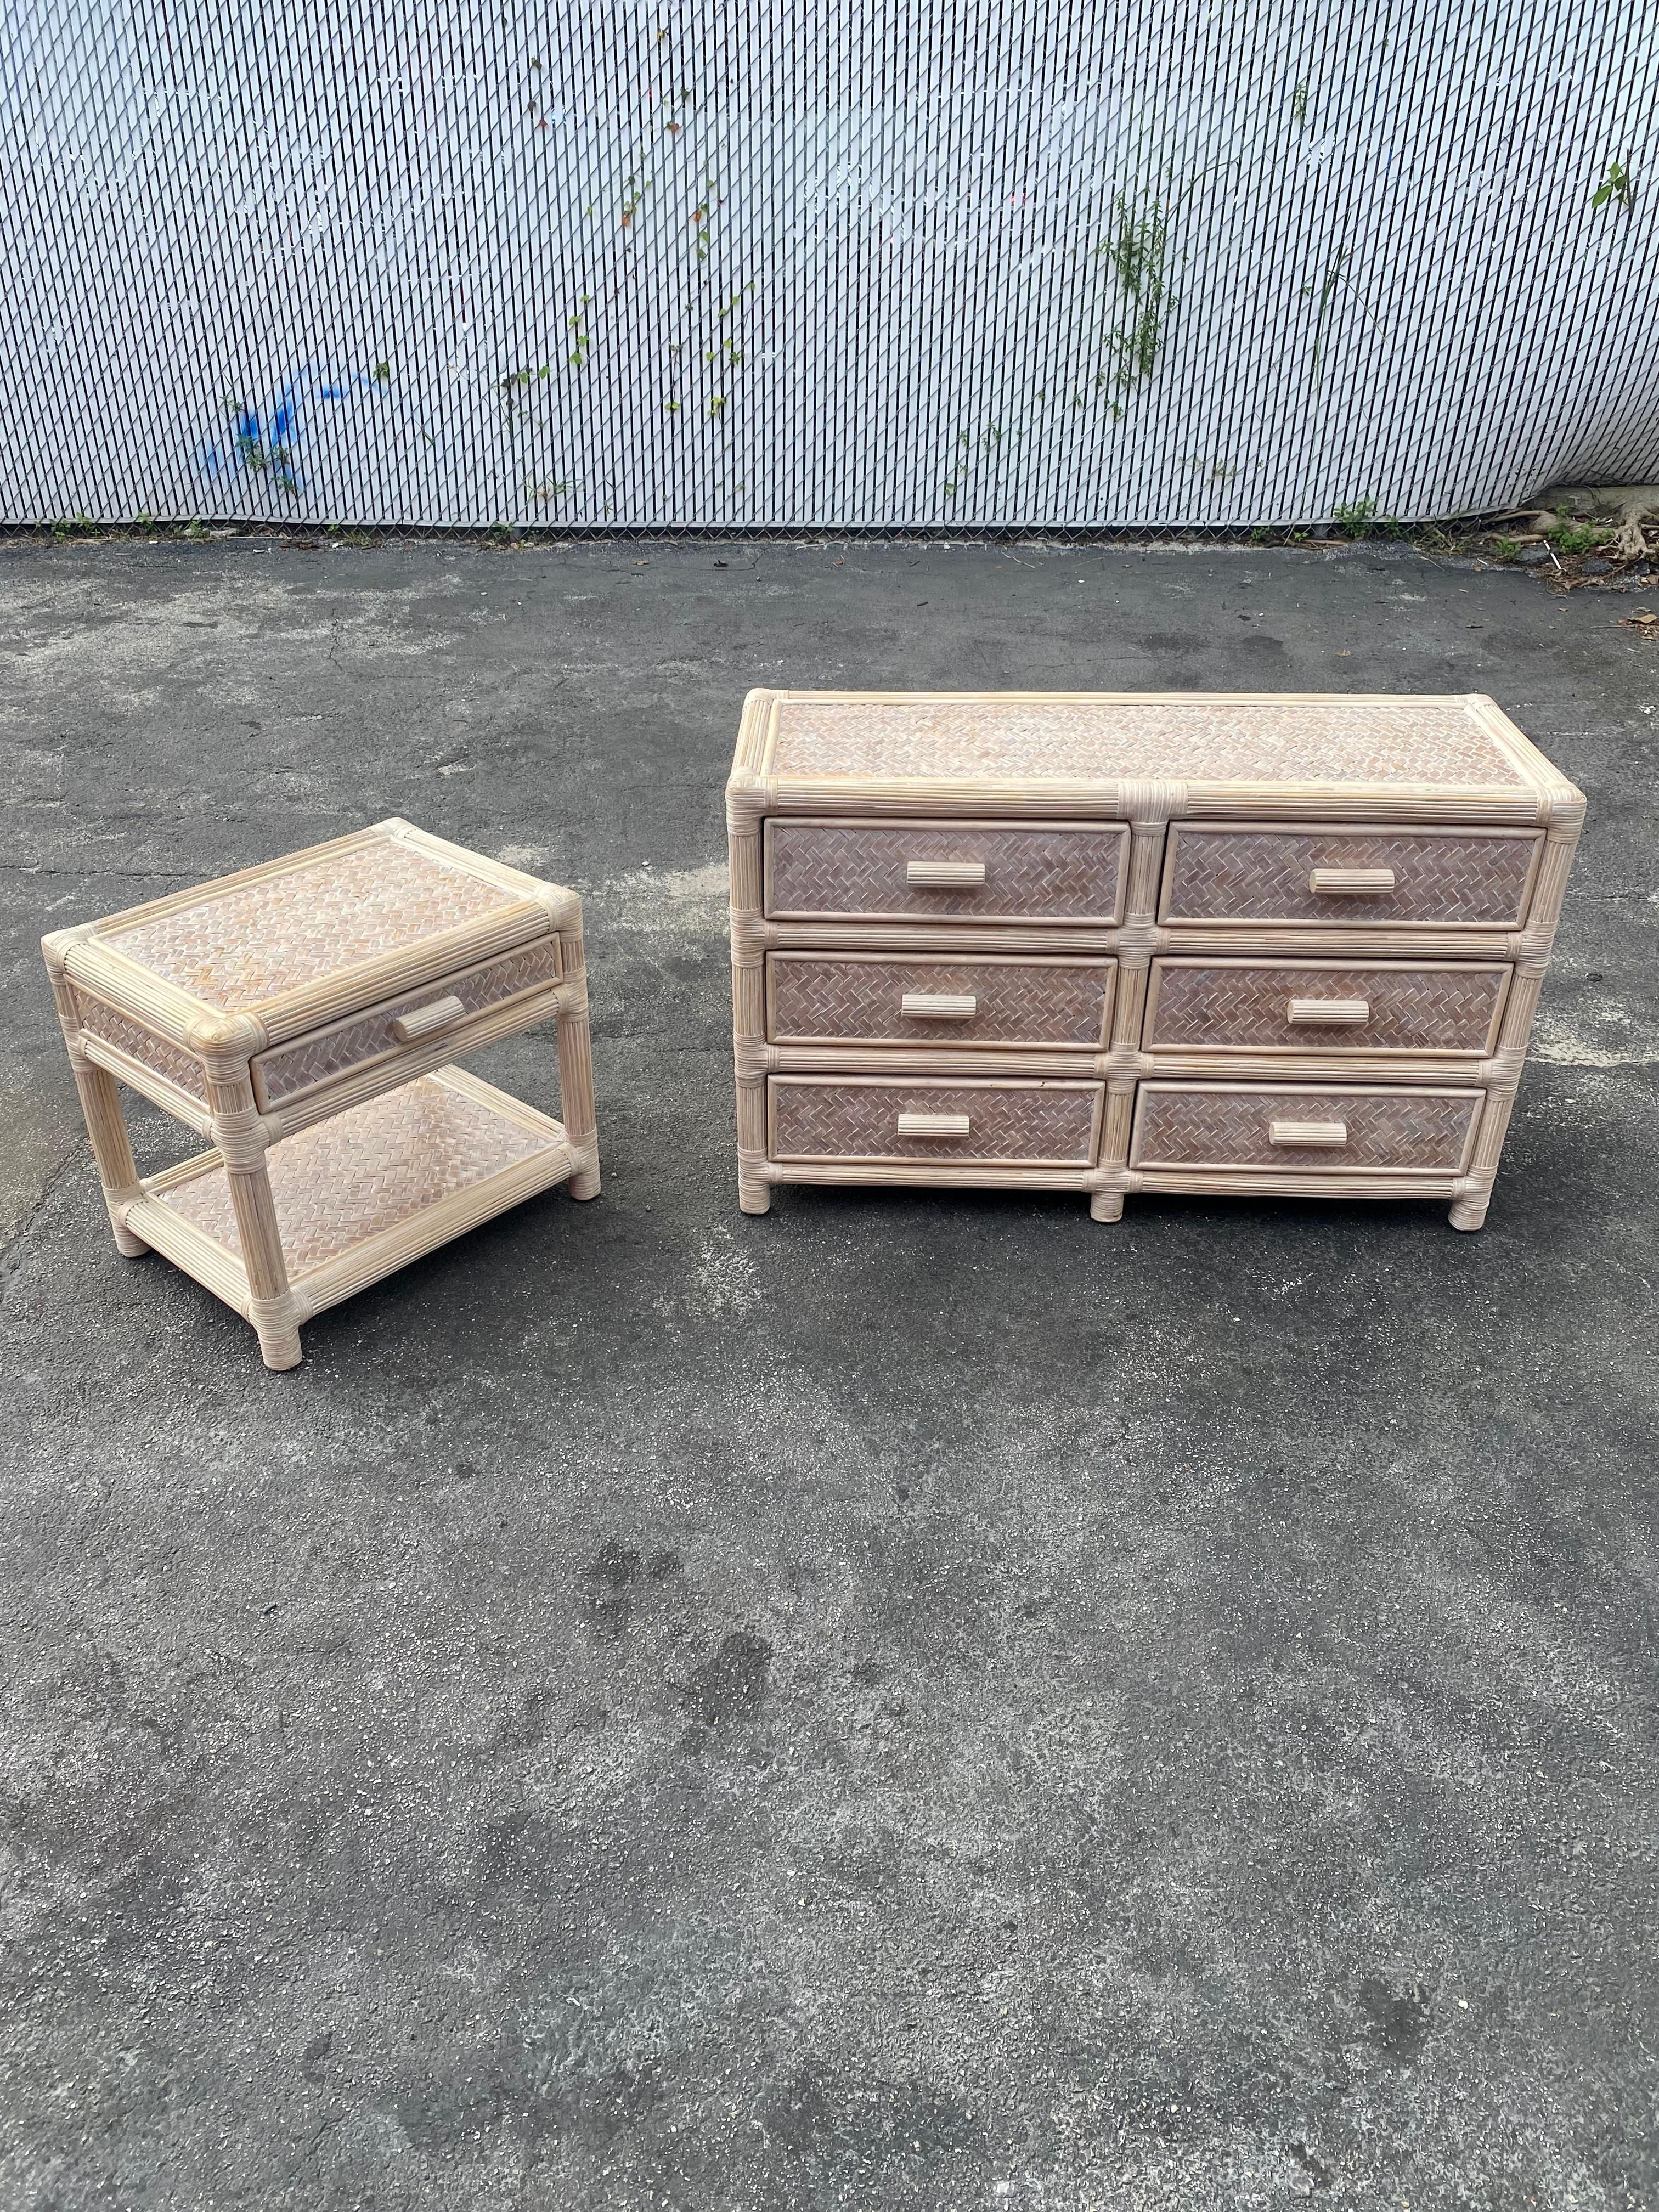 On offer on this occasion is one of the most stunning, dresser set you could hope to find. This is an ultra-rare opportunity to acquire what is, unequivocally, the best of the best, it being a most spectacular and beautifully-presented dresser.